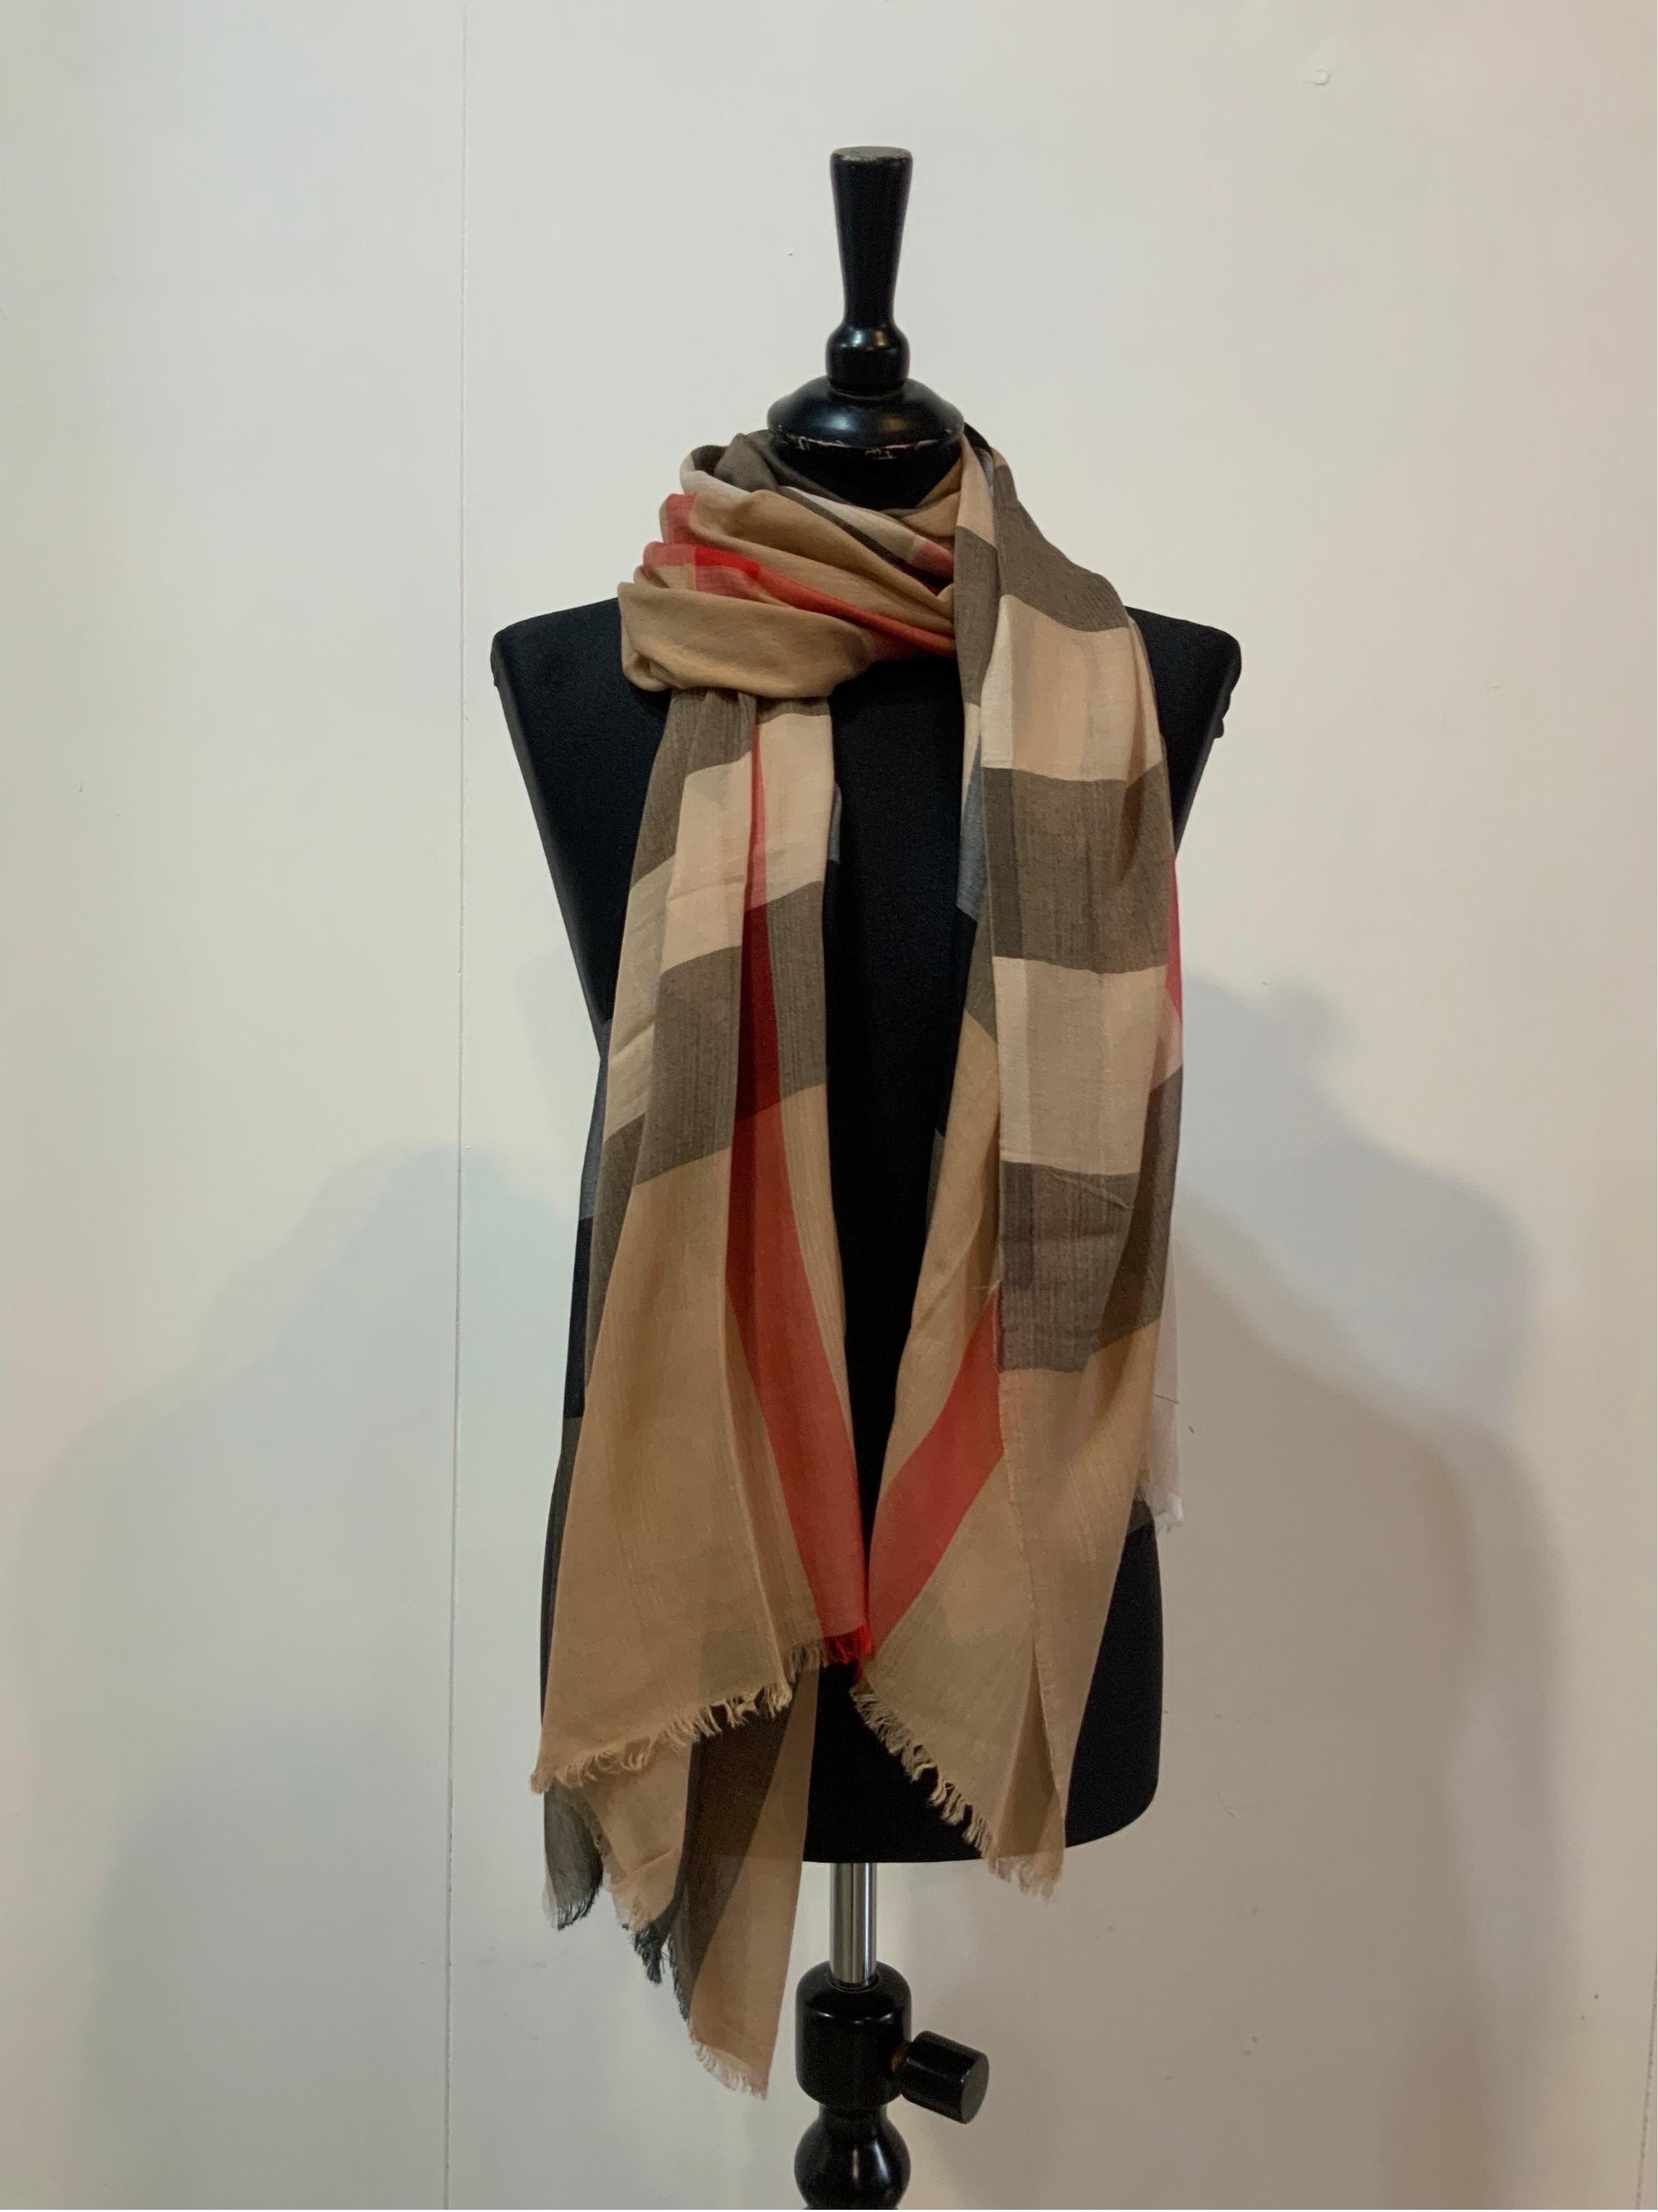 Burberry stole with iconic brand print.
In modal, cashmere and silk.
Measures 200cm X 90cm. Rectangular shape.
New, perfect condition.